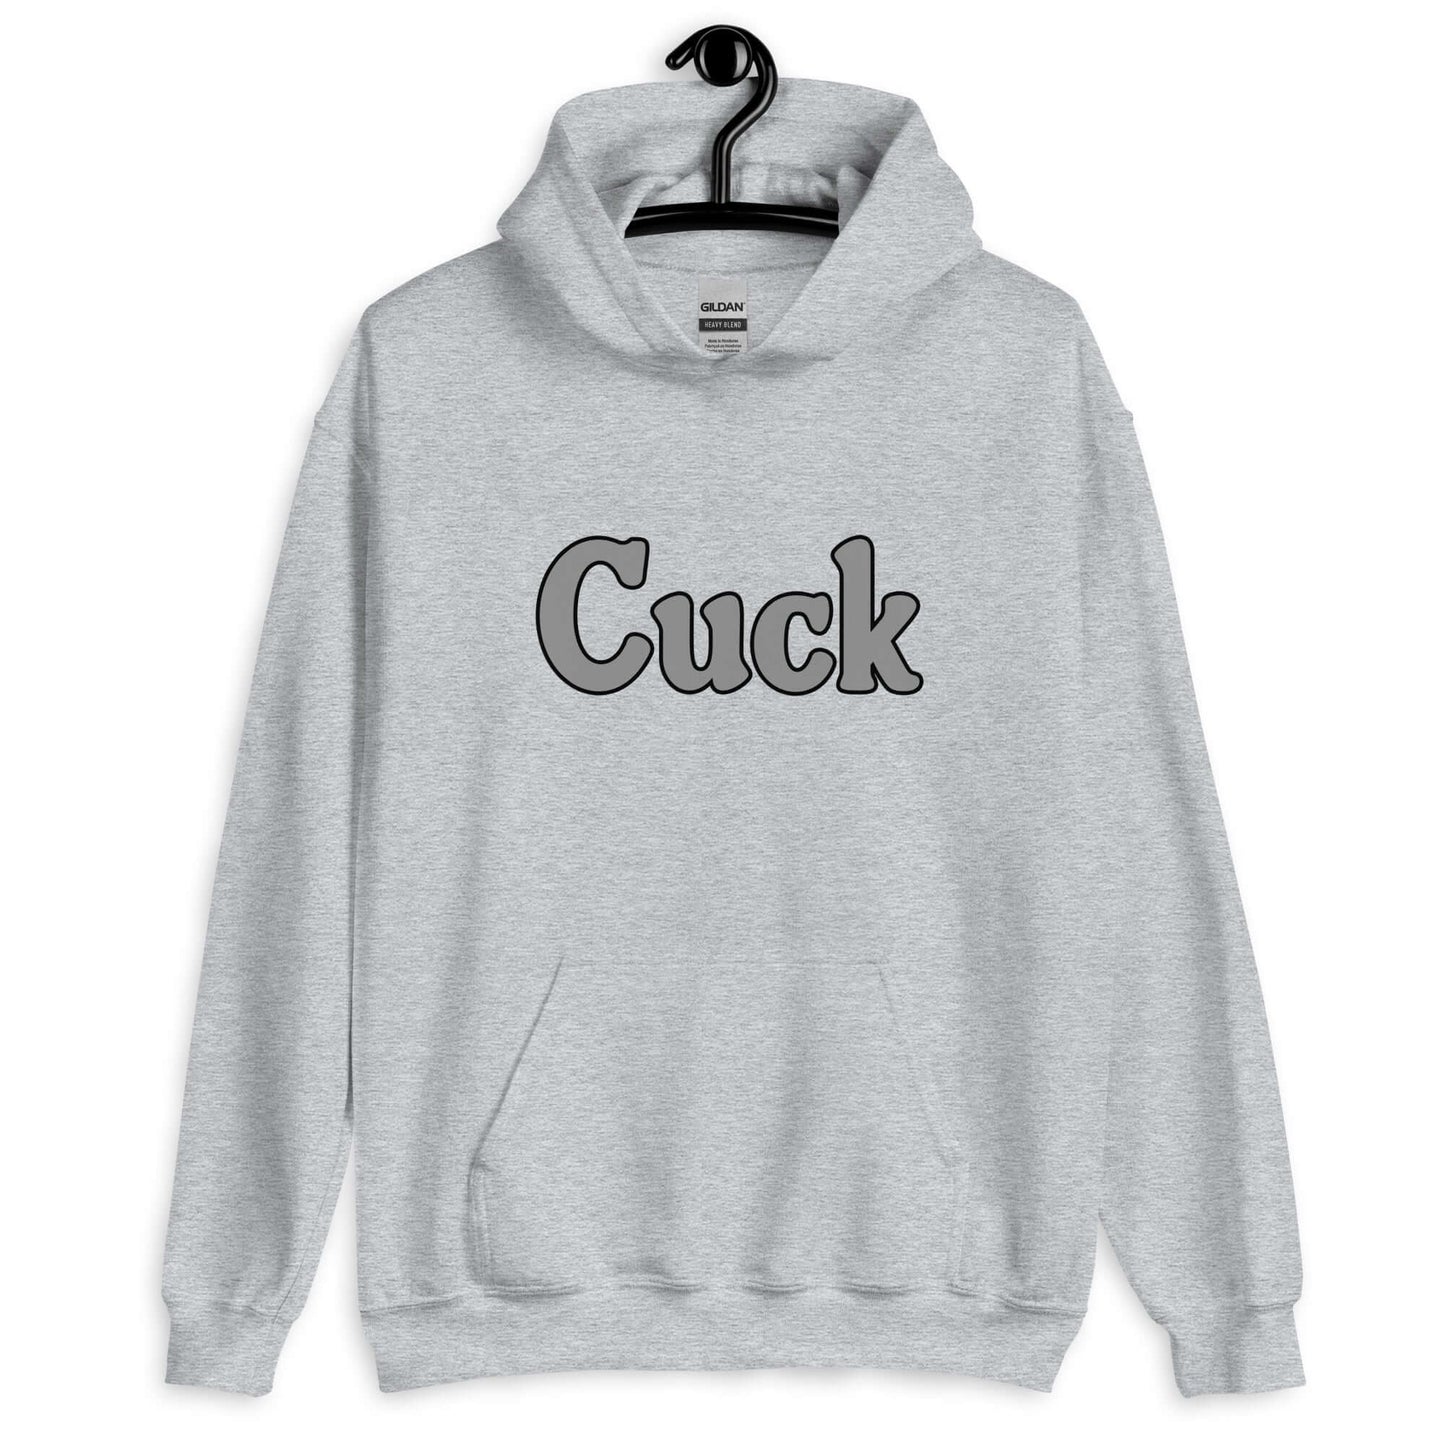 Light grey hoodie sweatshirt with the word Cuck printed on the front in grey.